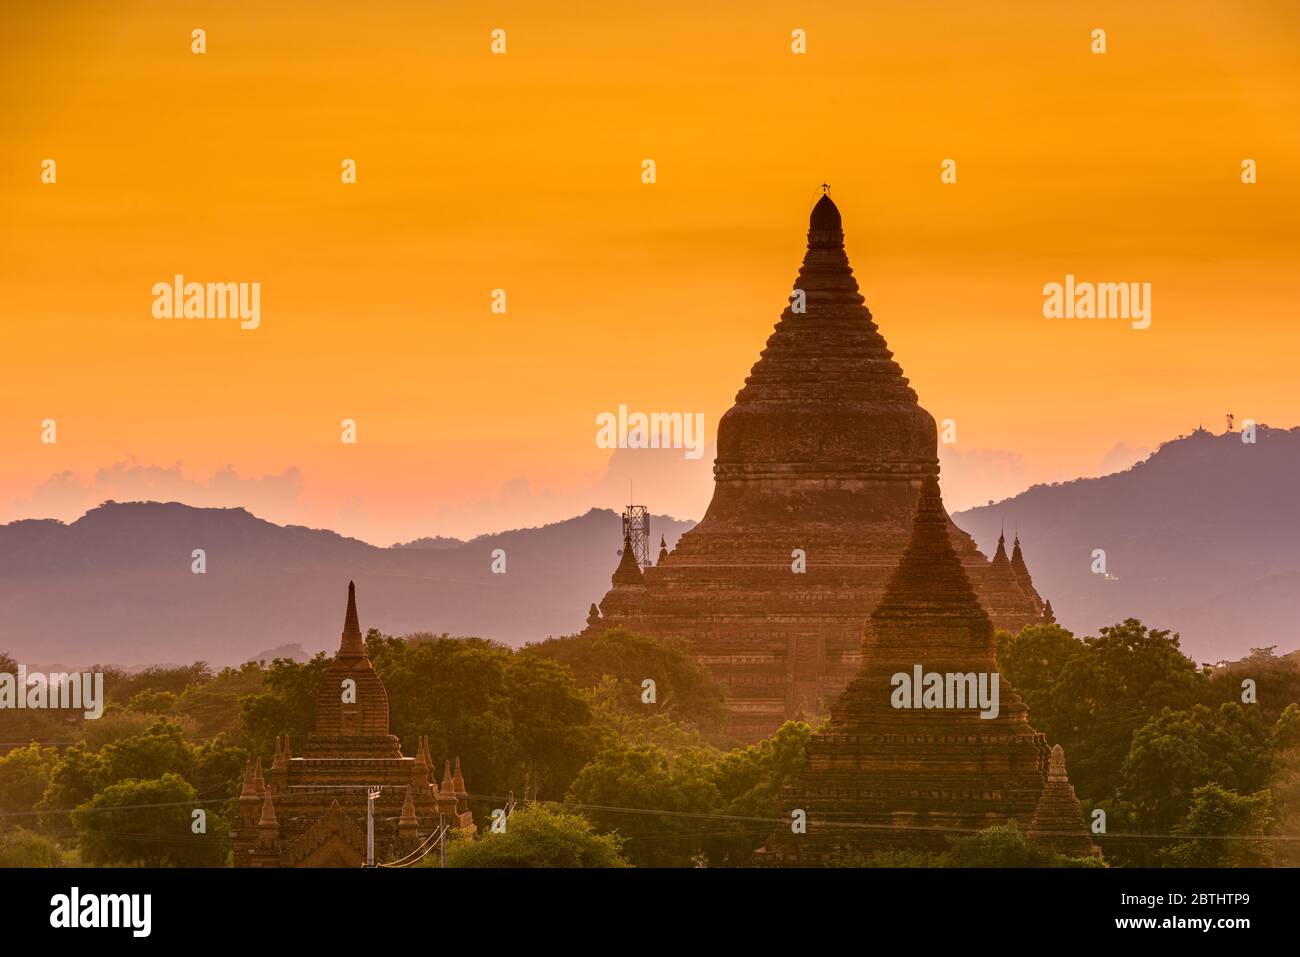 Bagan, Myanmar temples in the Archaeological Zone at dusk. Stock Photo